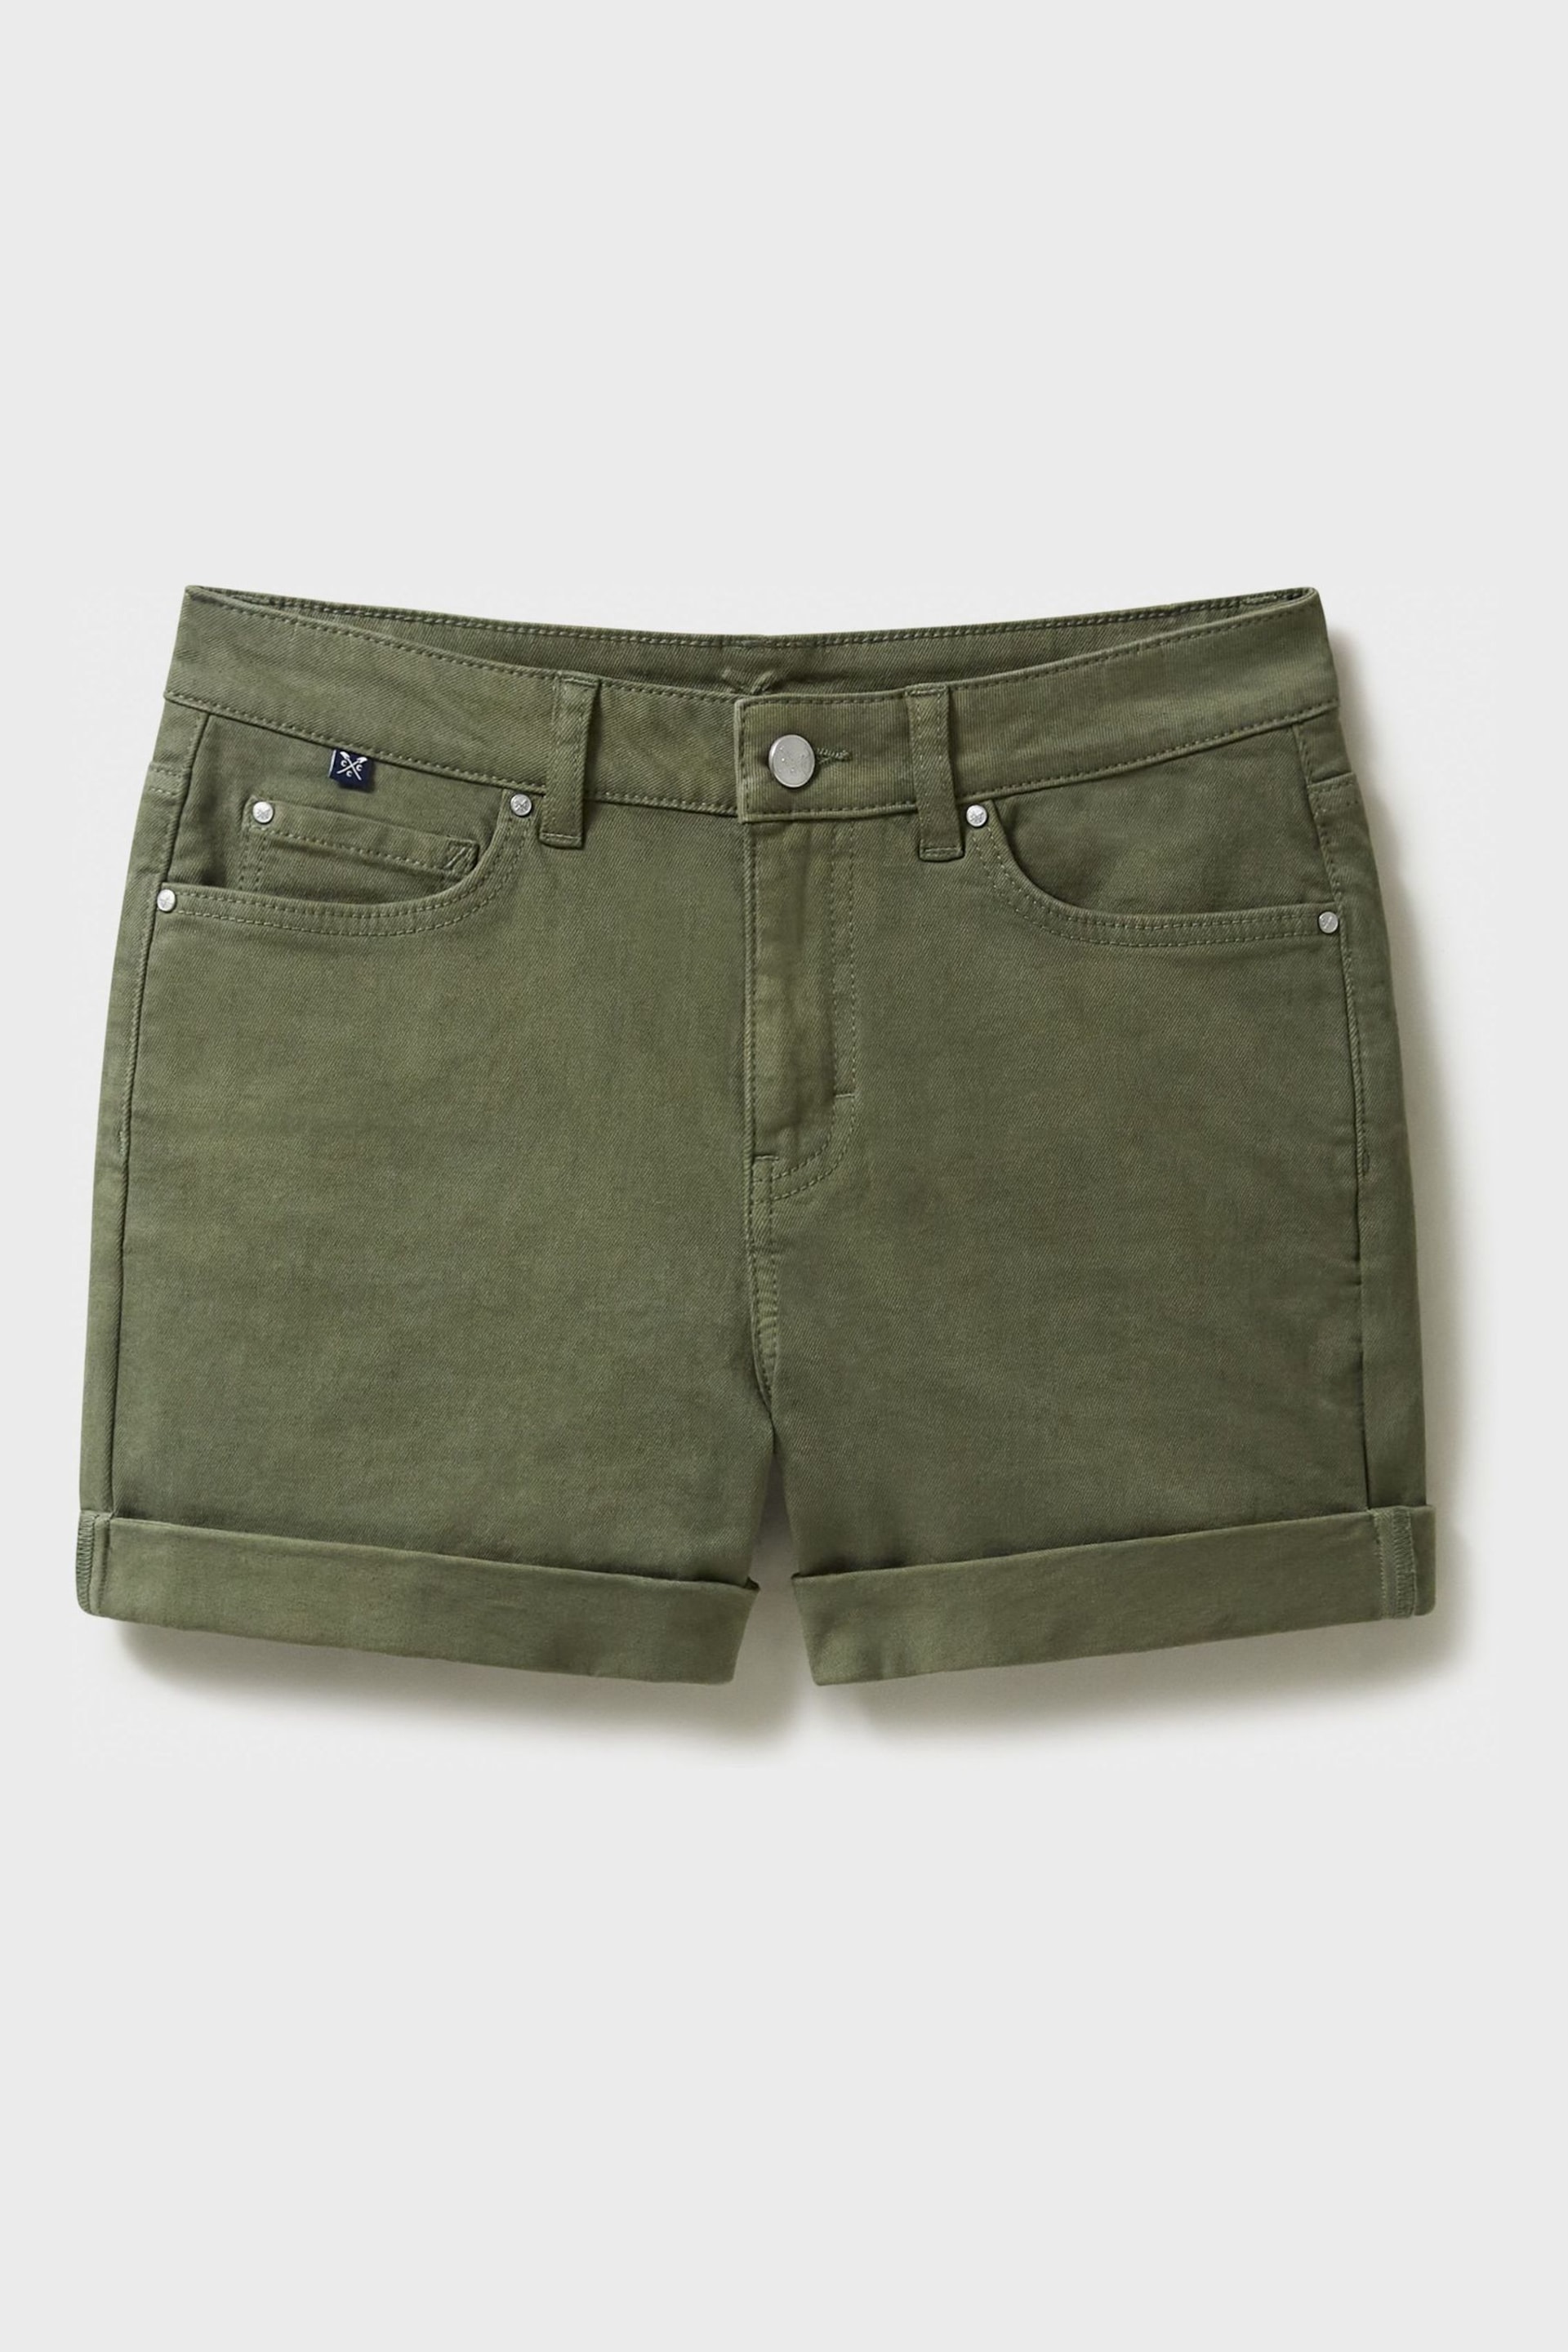 Crew Clothing Plain Cotton Fitted Turn Up Short - Image 4 of 4